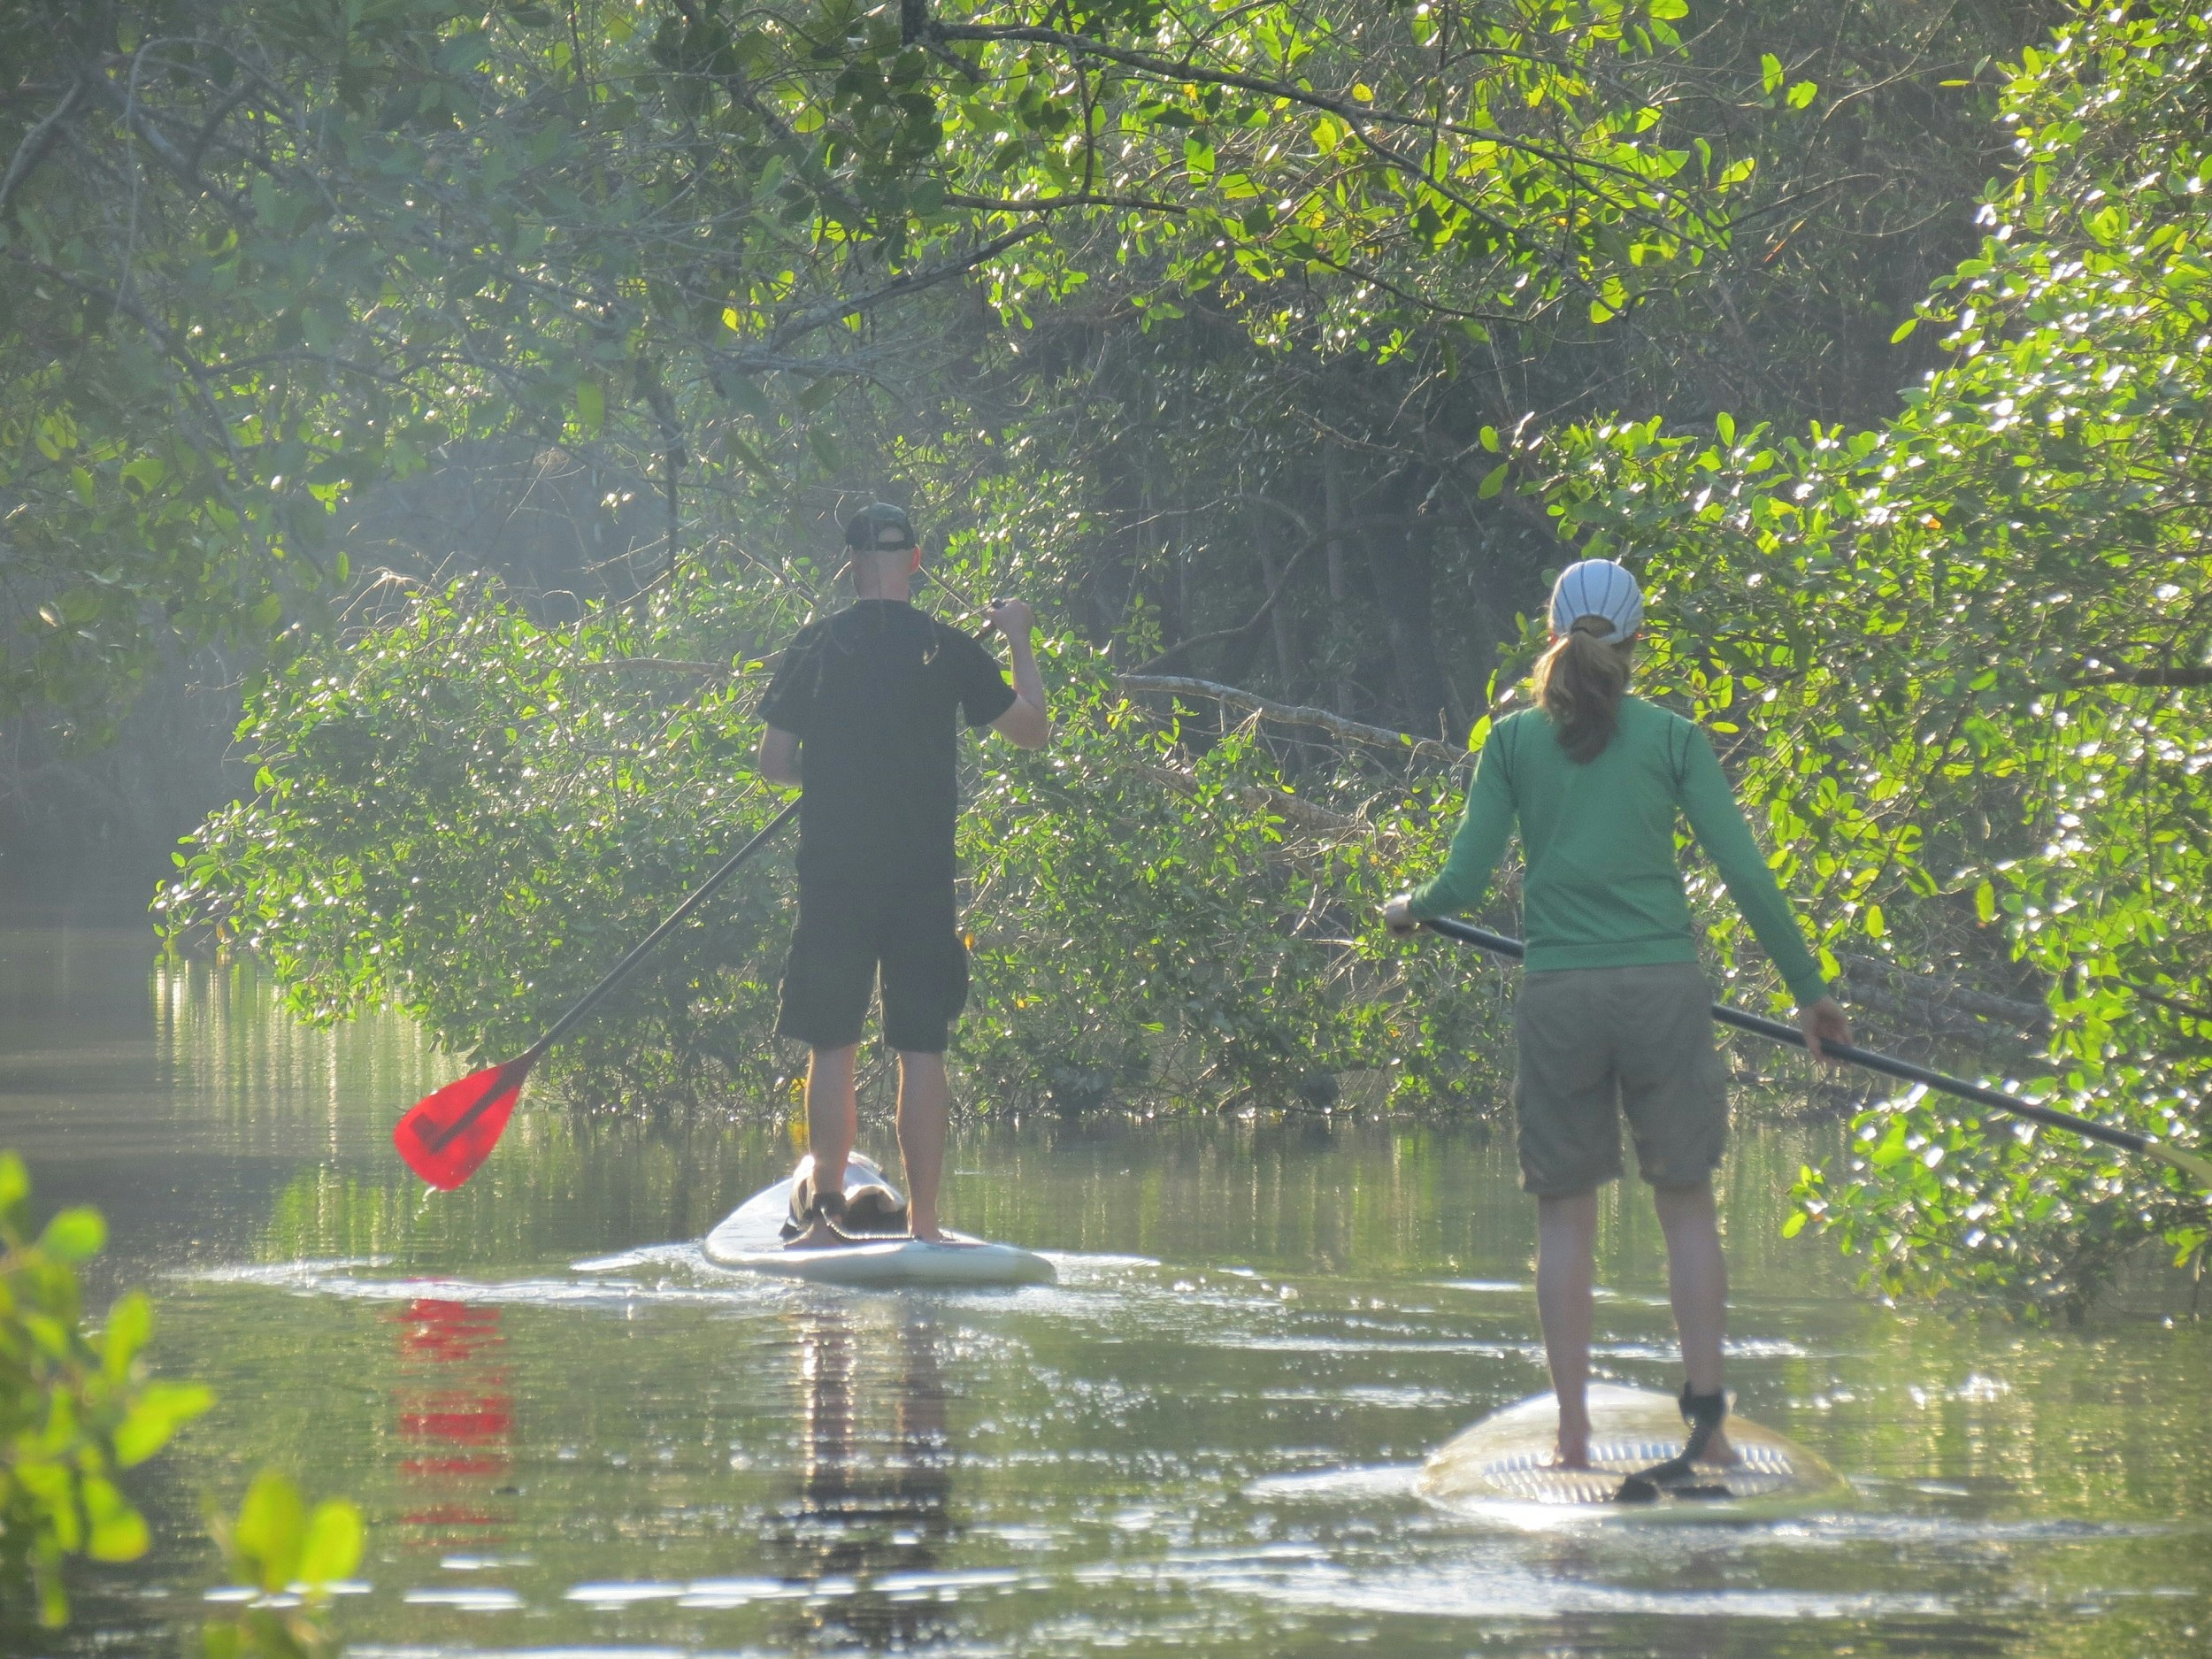 Two paddlers work their way along a narrow channel/tunnel in a dense mangrove forest.